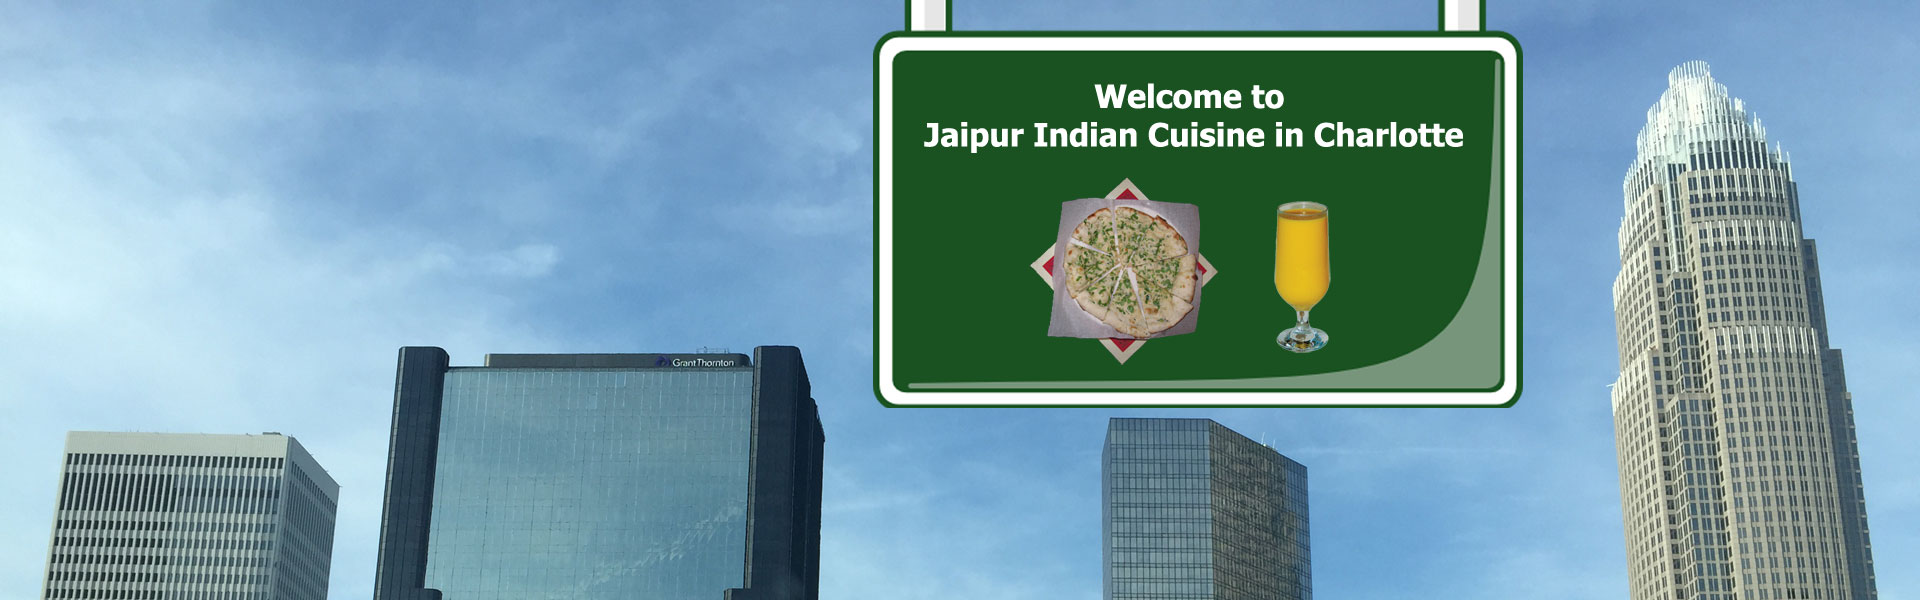 Welcome to jaipur charlotte Indian Restaurant